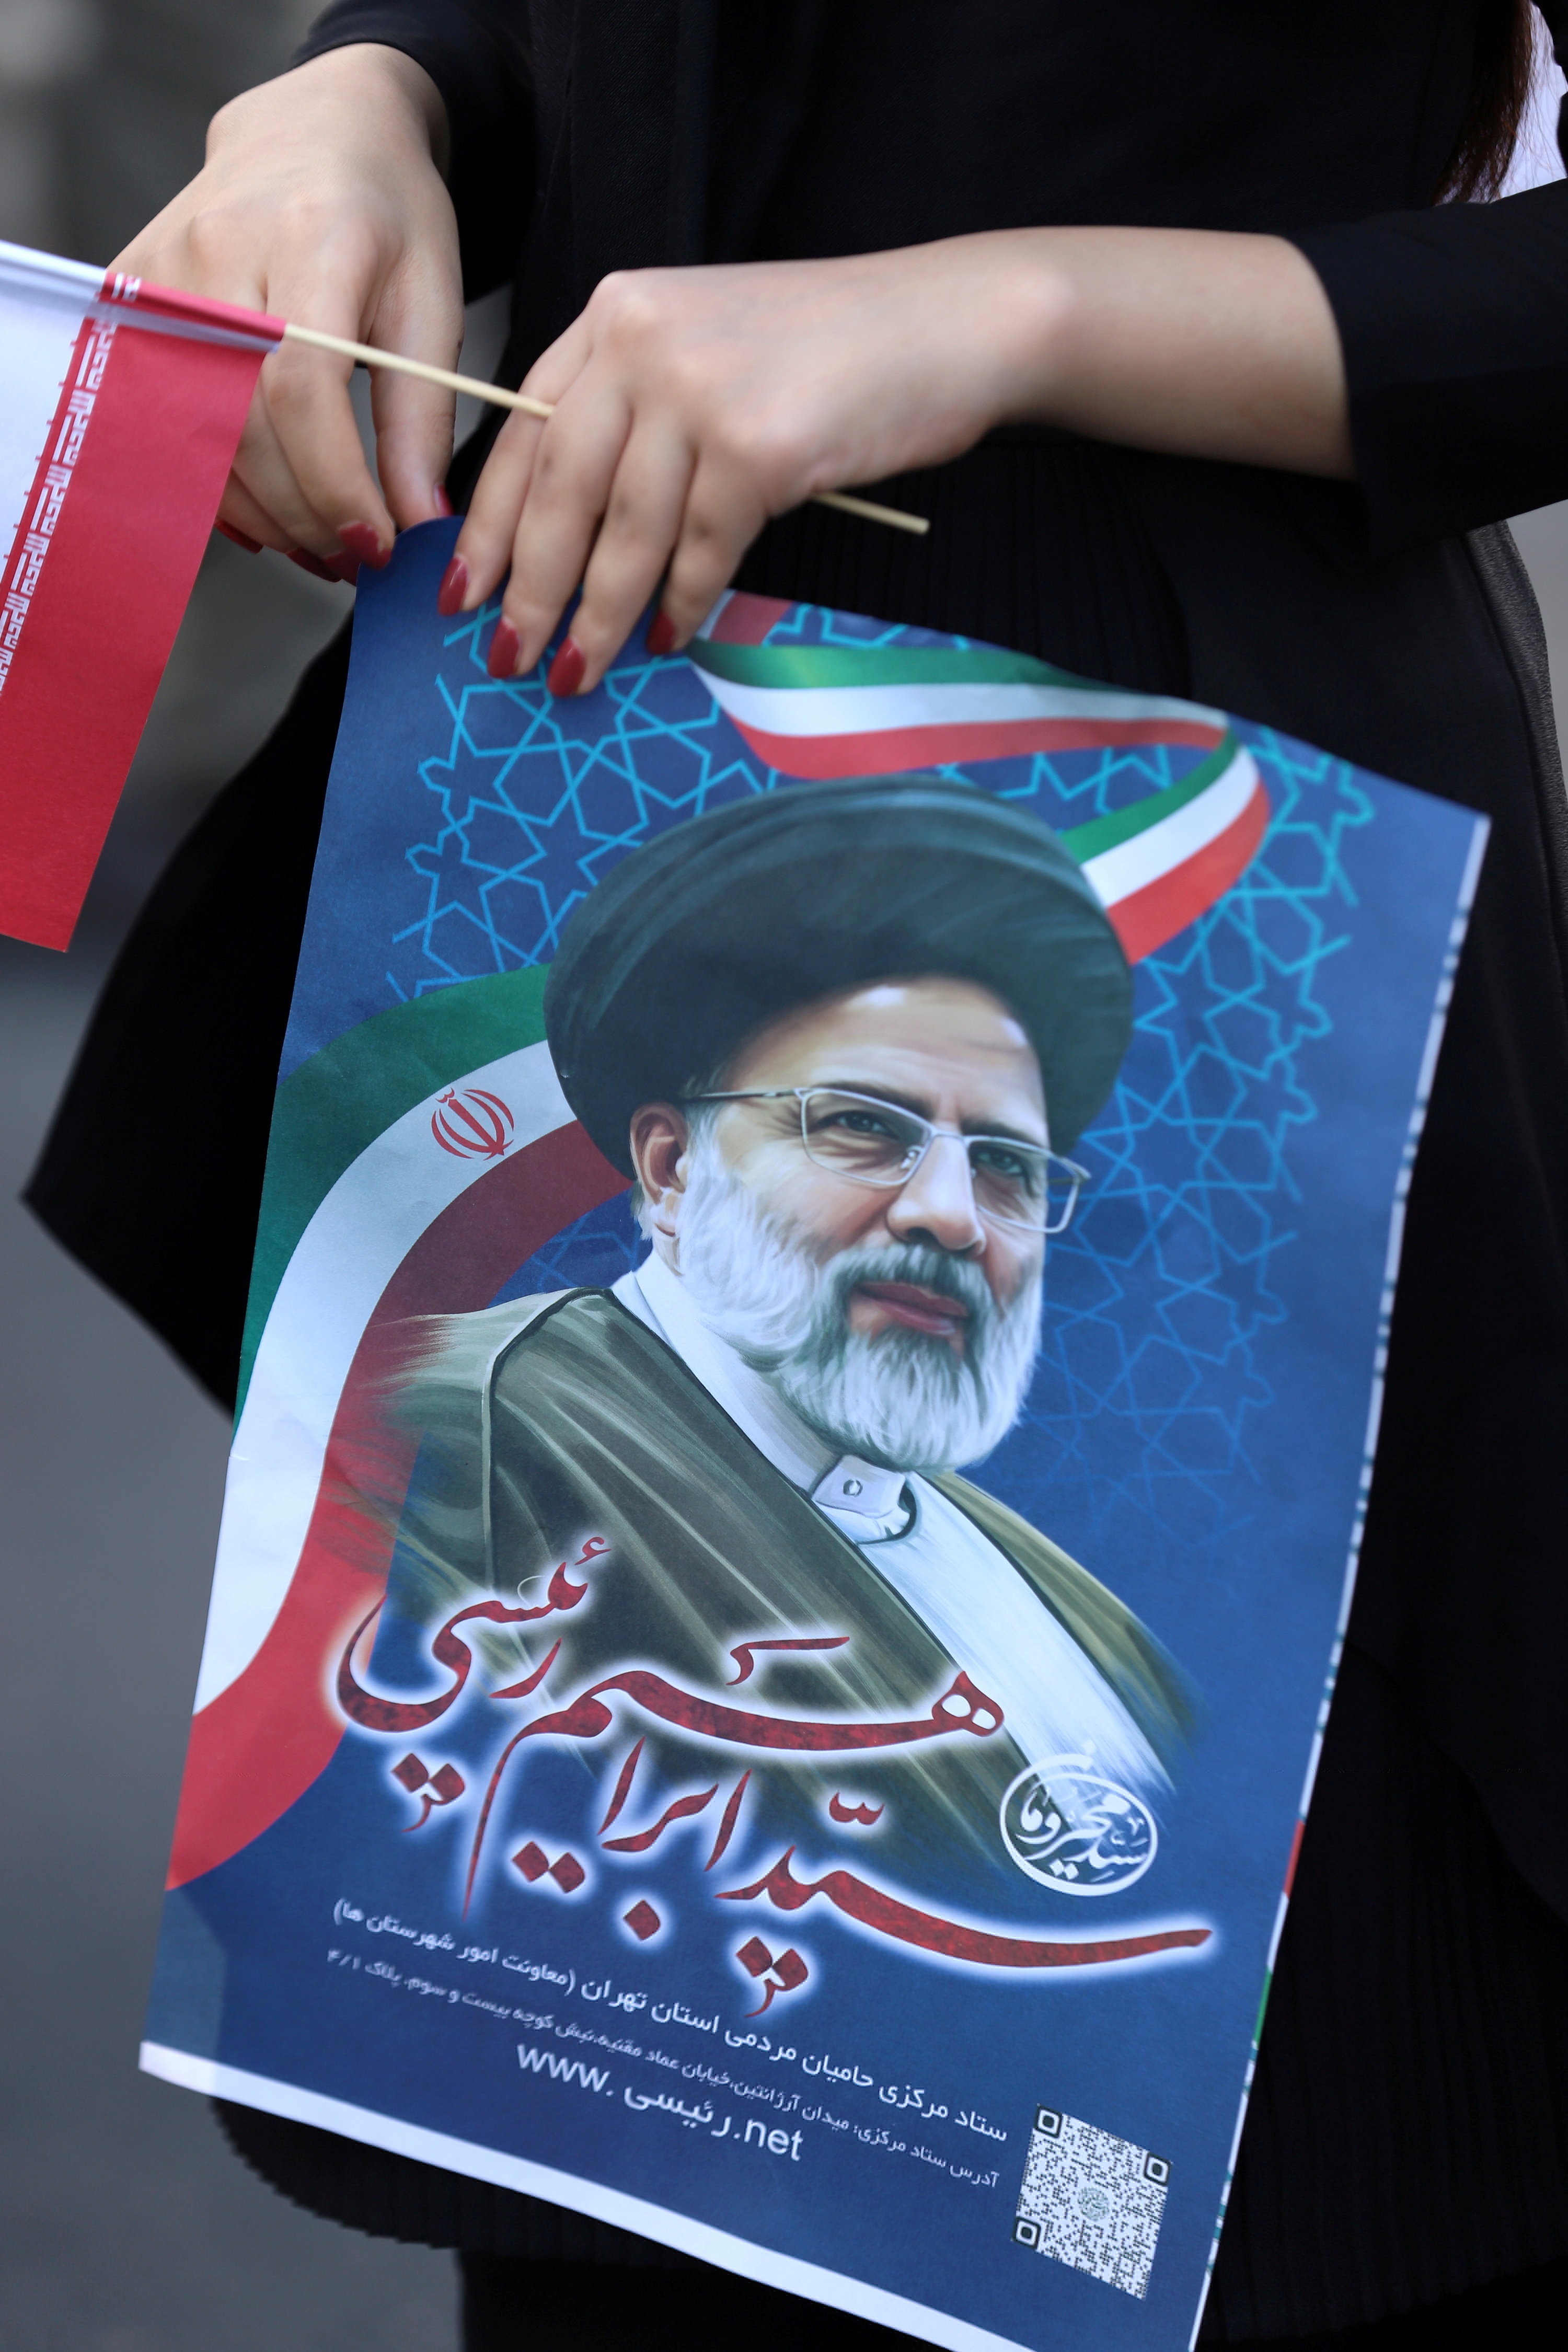 A supporter of presidential candidate Ebrahim Raisi holds a poster of him during an election rally in Tehran, Iran June 11, 2021.